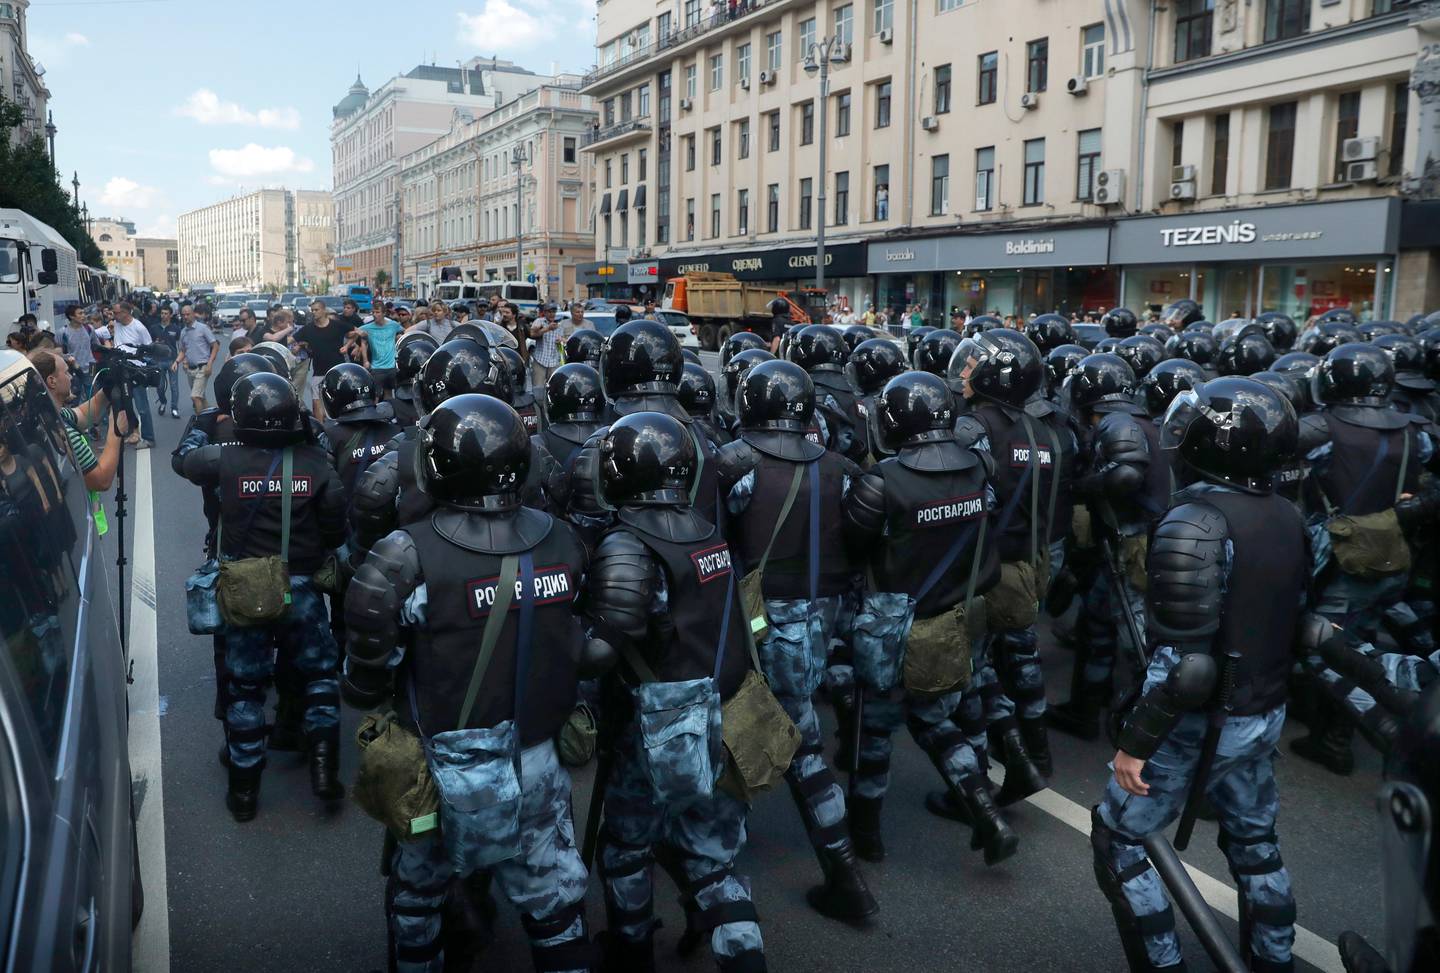 Police block a street during an unsanctioned rally in the center of Moscow, Russia, Saturday, July 27, 2019. Russian police are wrestling with demonstrators and have arrested hundreds in central Moscow during a protest demanding that opposition candidates be allowed to run for the Moscow city council. (AP Photo/ Pavel Golovkin)